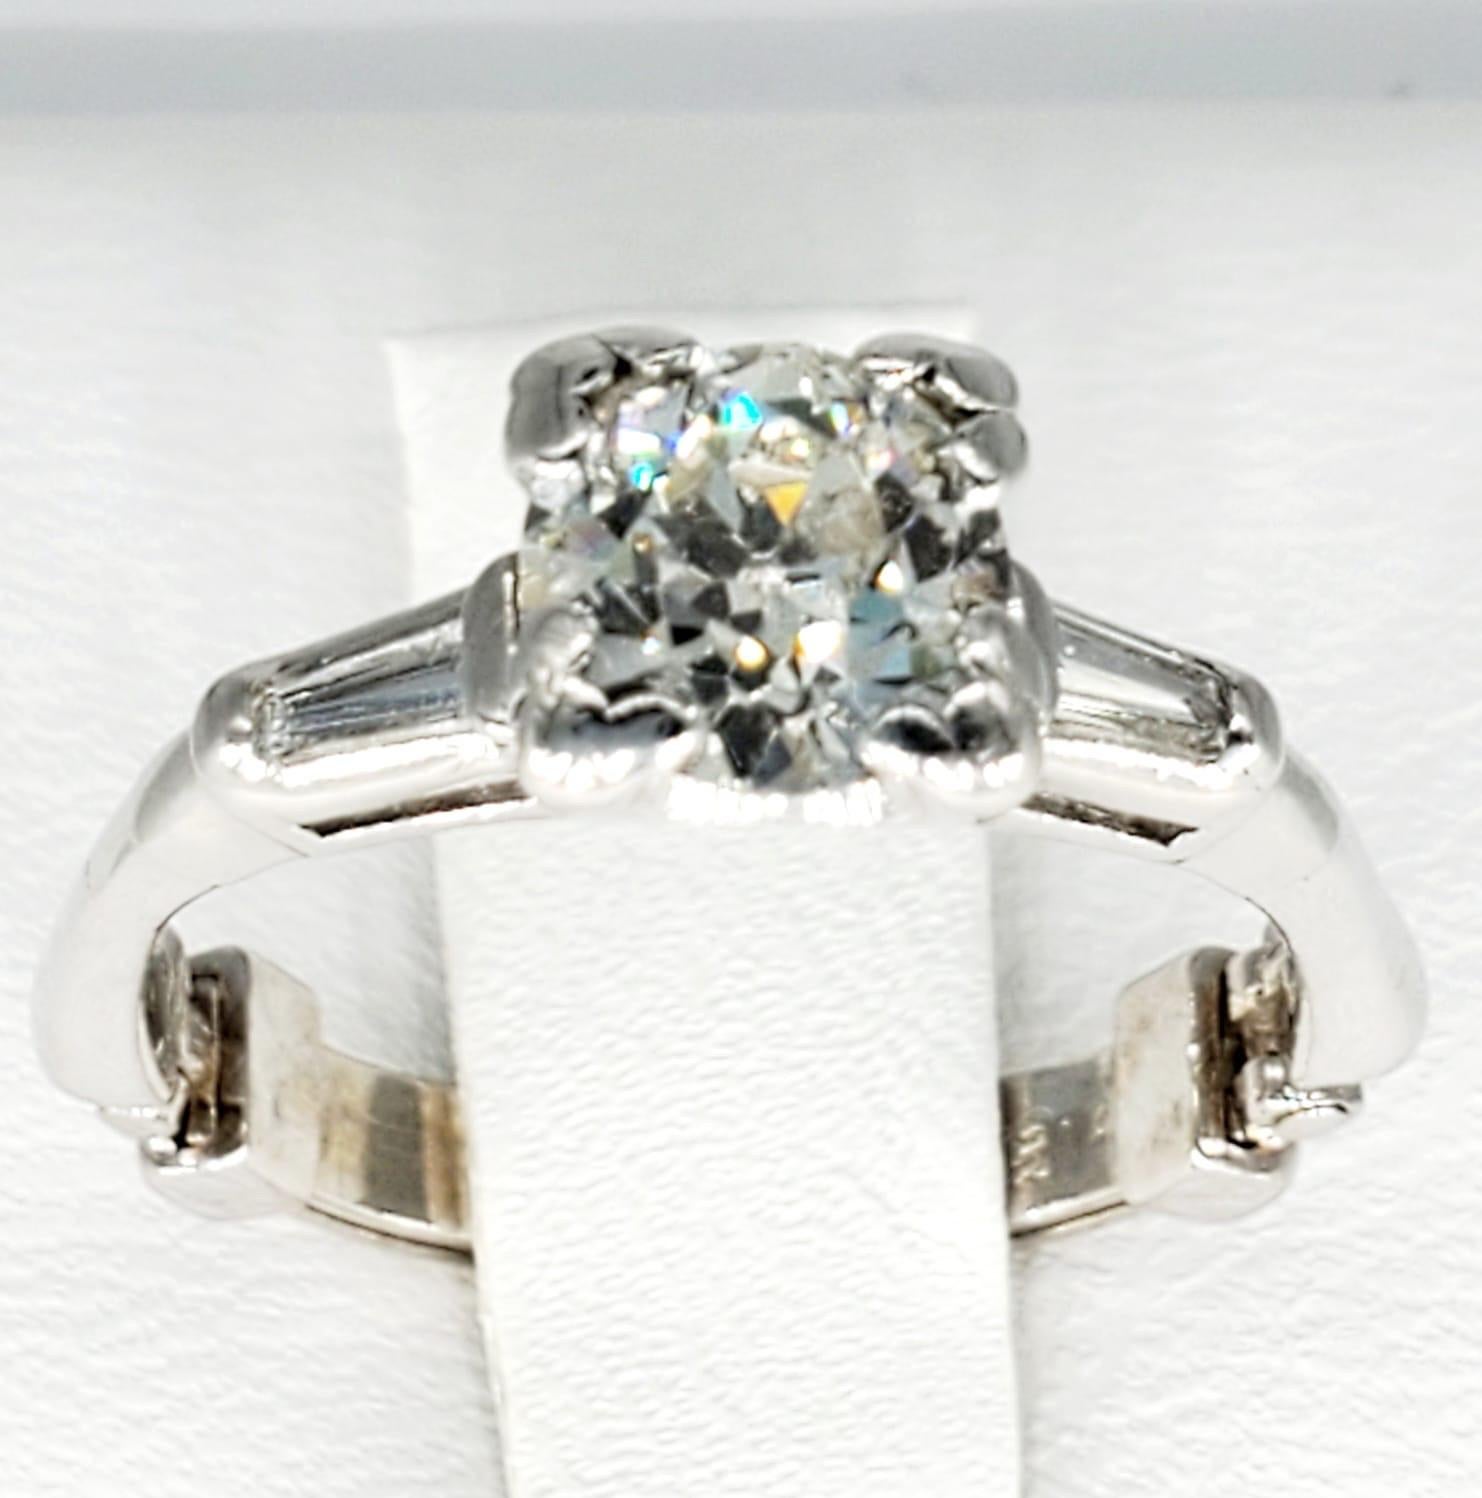 Antique 1.21 Carat Old Mine Cut Diamond Self Size Able Engagement Ring. The center diamond is an old mine diamonds that weights approx 1.01 carat and is a H/VS Clarity. The baguette diamonds on the sides weight a total of 0.20 carats H/VS Clarity.